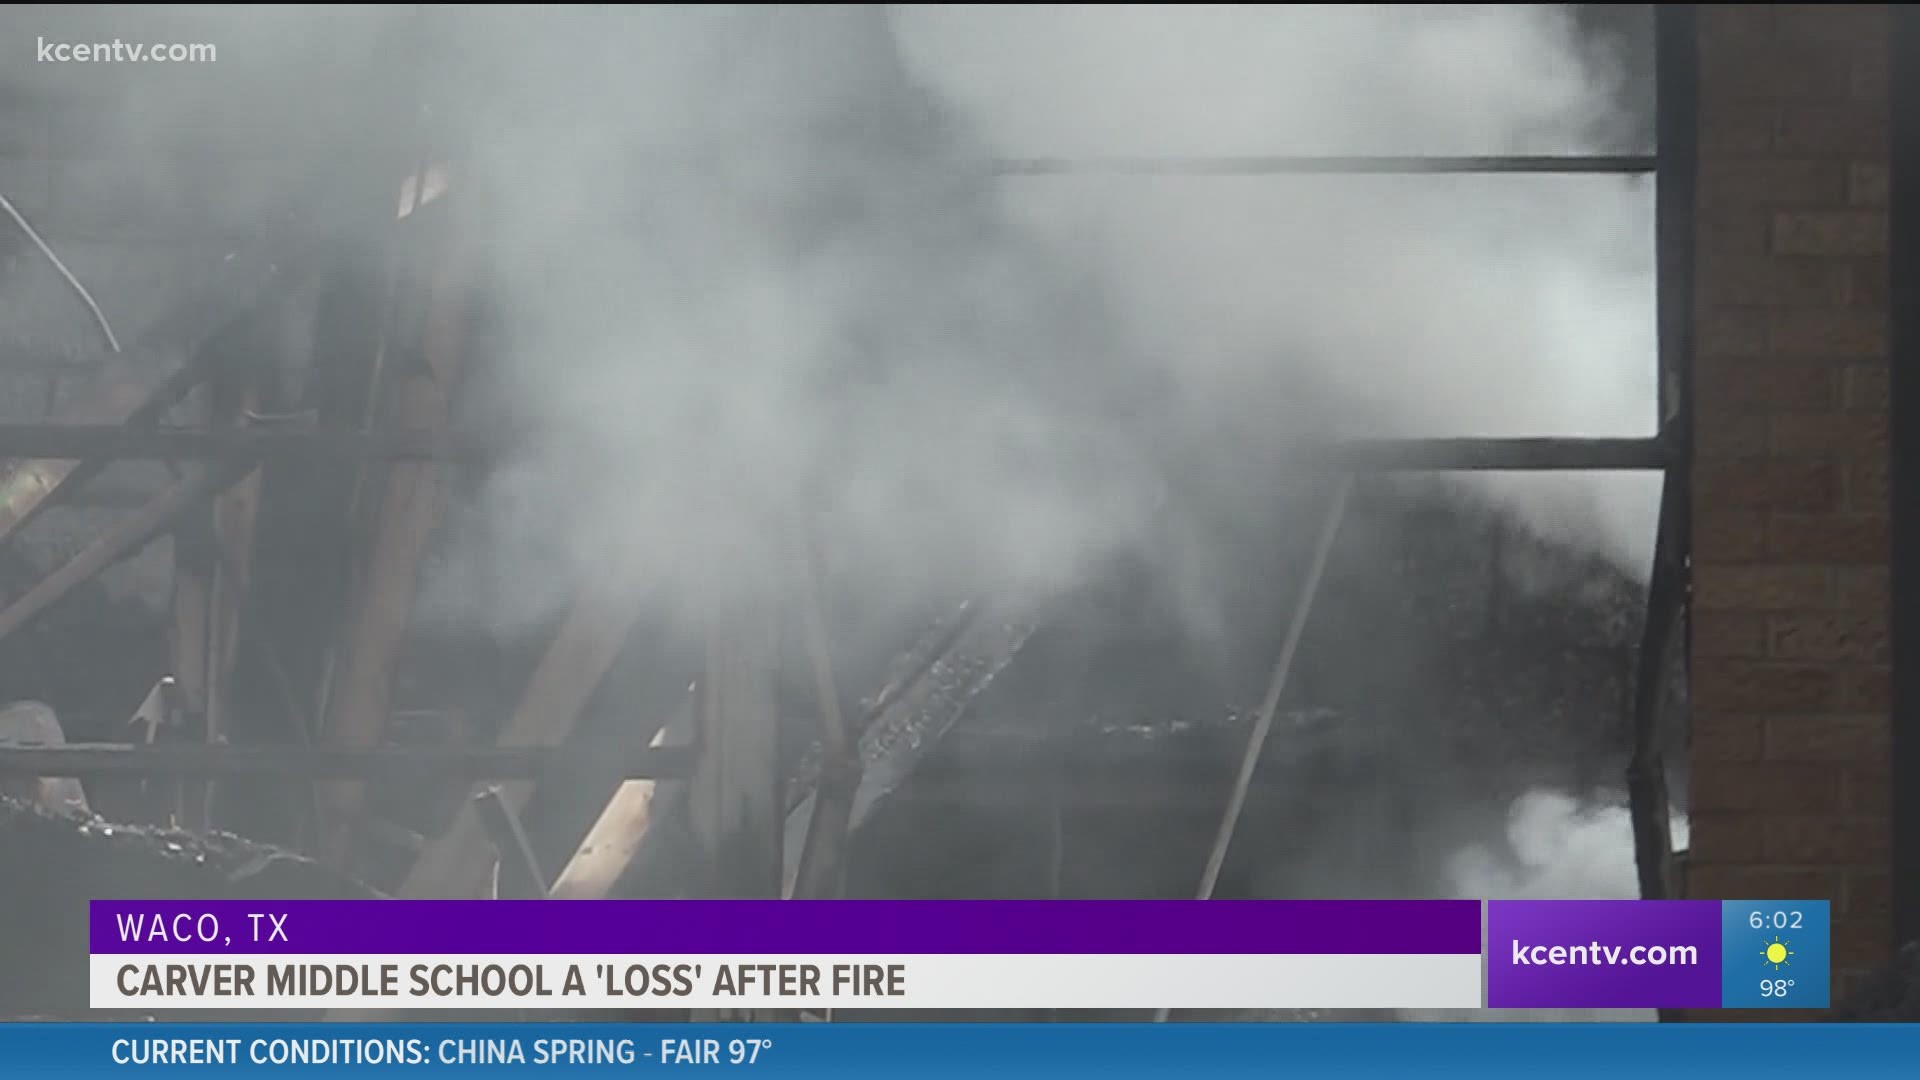 G.W. Carver Middle School is considered a total loss